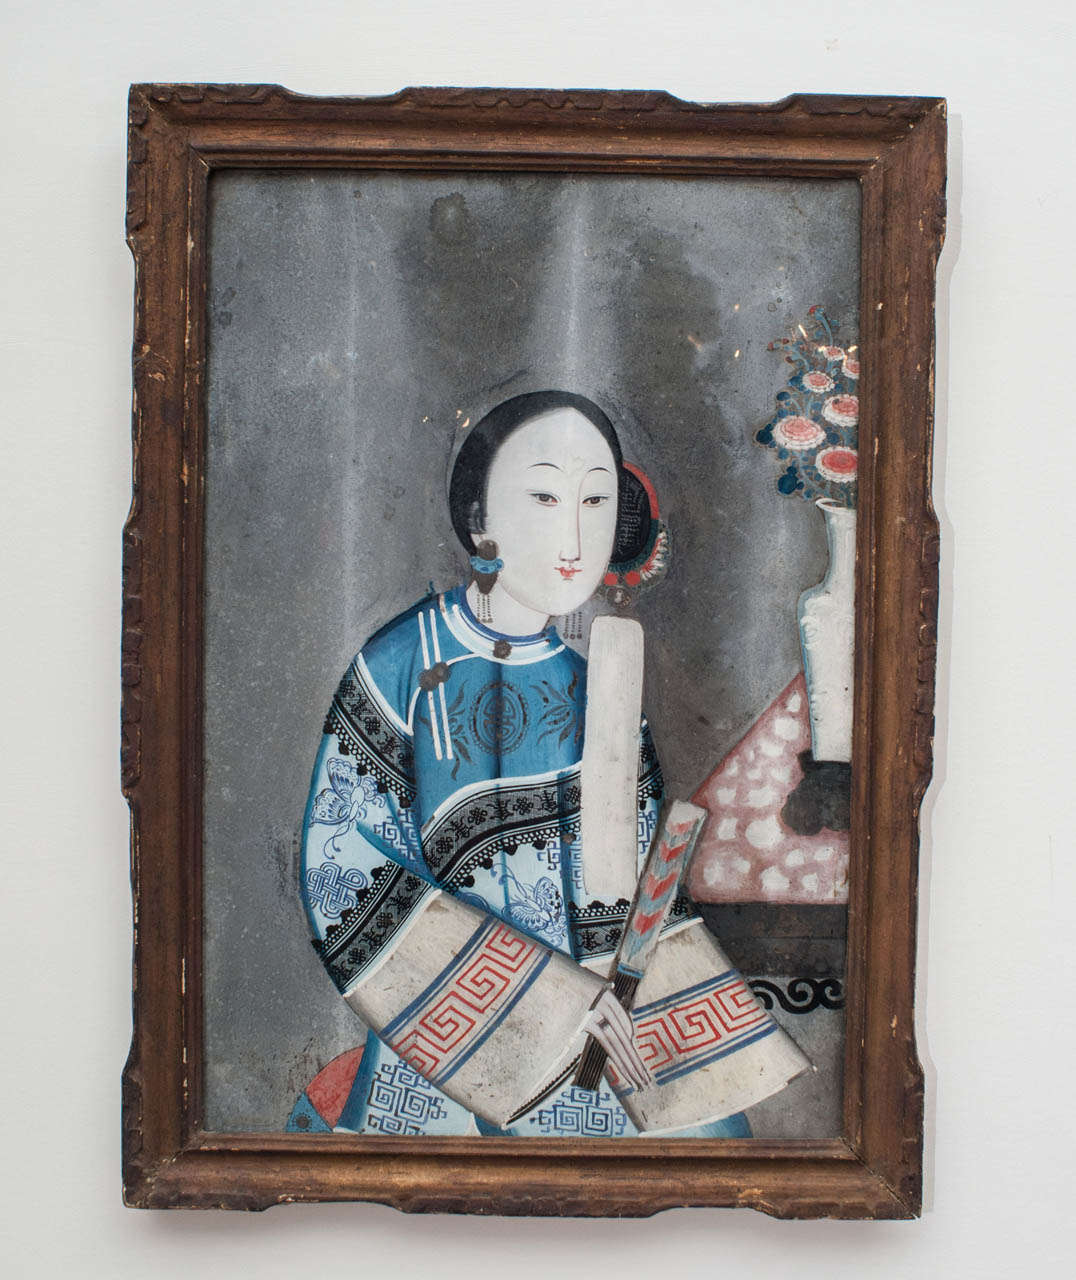 A Nineteenth Century Chinese portrait of a woman, reverse painted on glass.